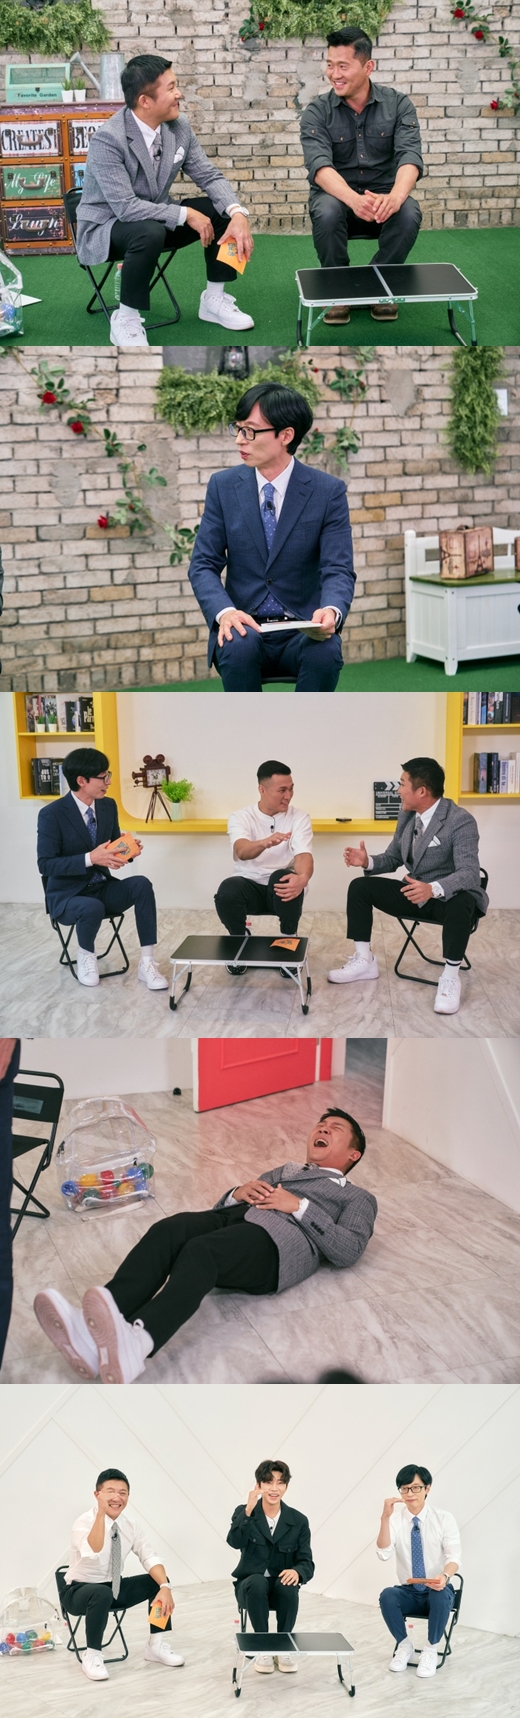 Cable channel tvN You Quiz on the Block will feature HERO.In the 152th episode of You Quiz on the Block, which is broadcasted at 8:40 pm on the 4th, he will travel with Heros in each field.Kang Hyung-wook, Chan Sung Jung martial arts player, singer Lim Young-woong will appear as a user and will tell the story of a hot life that has become a place of Hero with passion and challenge.There will also be a conversation with Korean zombie Chan Sung Jung, a hero of the Korean fighting machine.After nine years of re-challenging the championship after the first UFC title match in 2013, he vividly revealed the story of the Kyonggi behind-the-scenes story with Volkanowski and made everyone immerse.In addition, it unravels the personal history that was not disclosed anywhere, such as the daily life of constantly training, the attitude of working on Kyonggi every moment.A low-kick demonstration that made Yo Jae-Suk and Jo Se-ho scream is also foreseen, raising expectations.It also has time to learn about the national hero, singer Lim Young-wong, who wrote a new history of the music industry.He tells the current situation as a national singer who captivated the whole generation from the moment he entered the trot, and tells everything about youth Lim Young-woong and human Lim Young-woong.I practice a lot to improve the music shortage, he said, and I think I have you today because of these efforts.The first performance of the show will also provide a fun lecture on the entertainment Cheetki of Yo Jae-Suk and Jo Se-ho for the nervous baby.